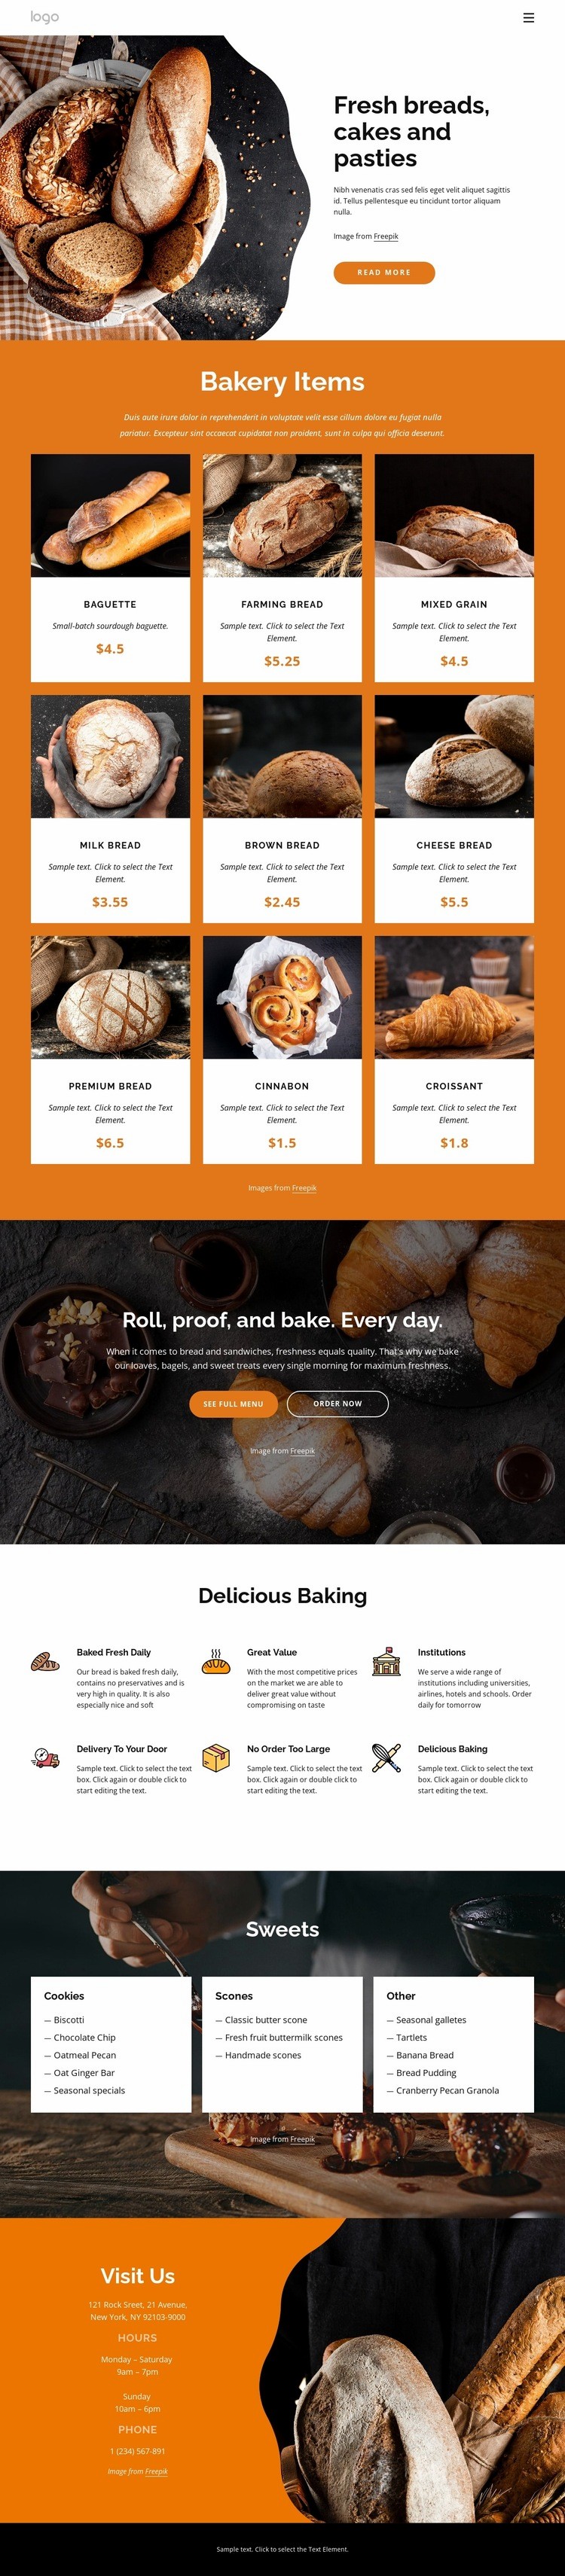 Fresh breads and cakes Squarespace Template Alternative